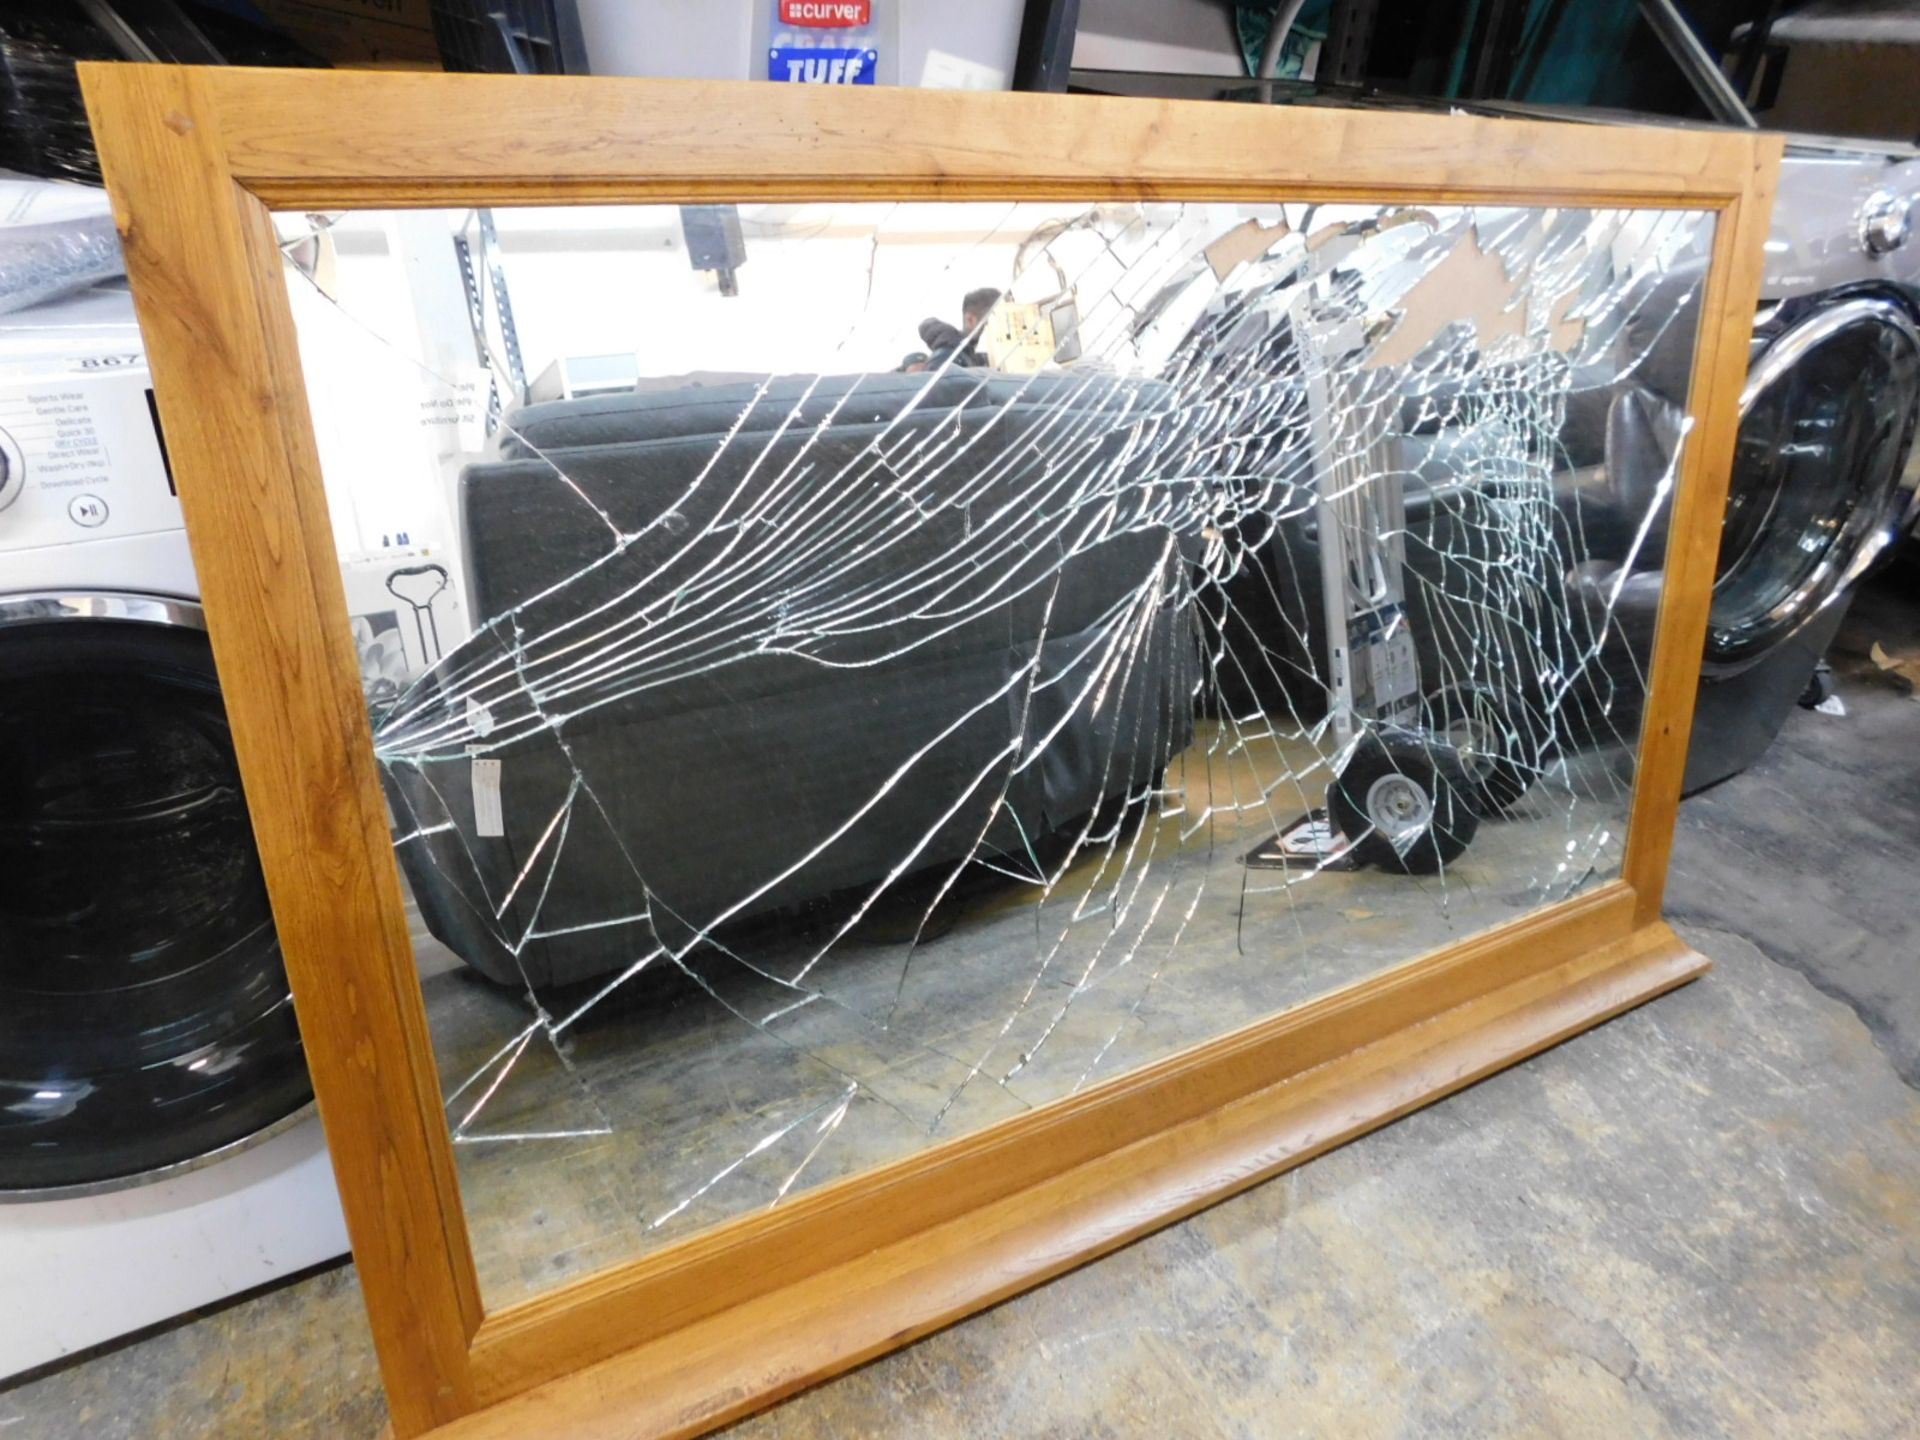 1 WOODEN LARGE LEANING MIRROR FRAME 160 X 103 CM RRP Â£299 (NEEDS MIRROR)